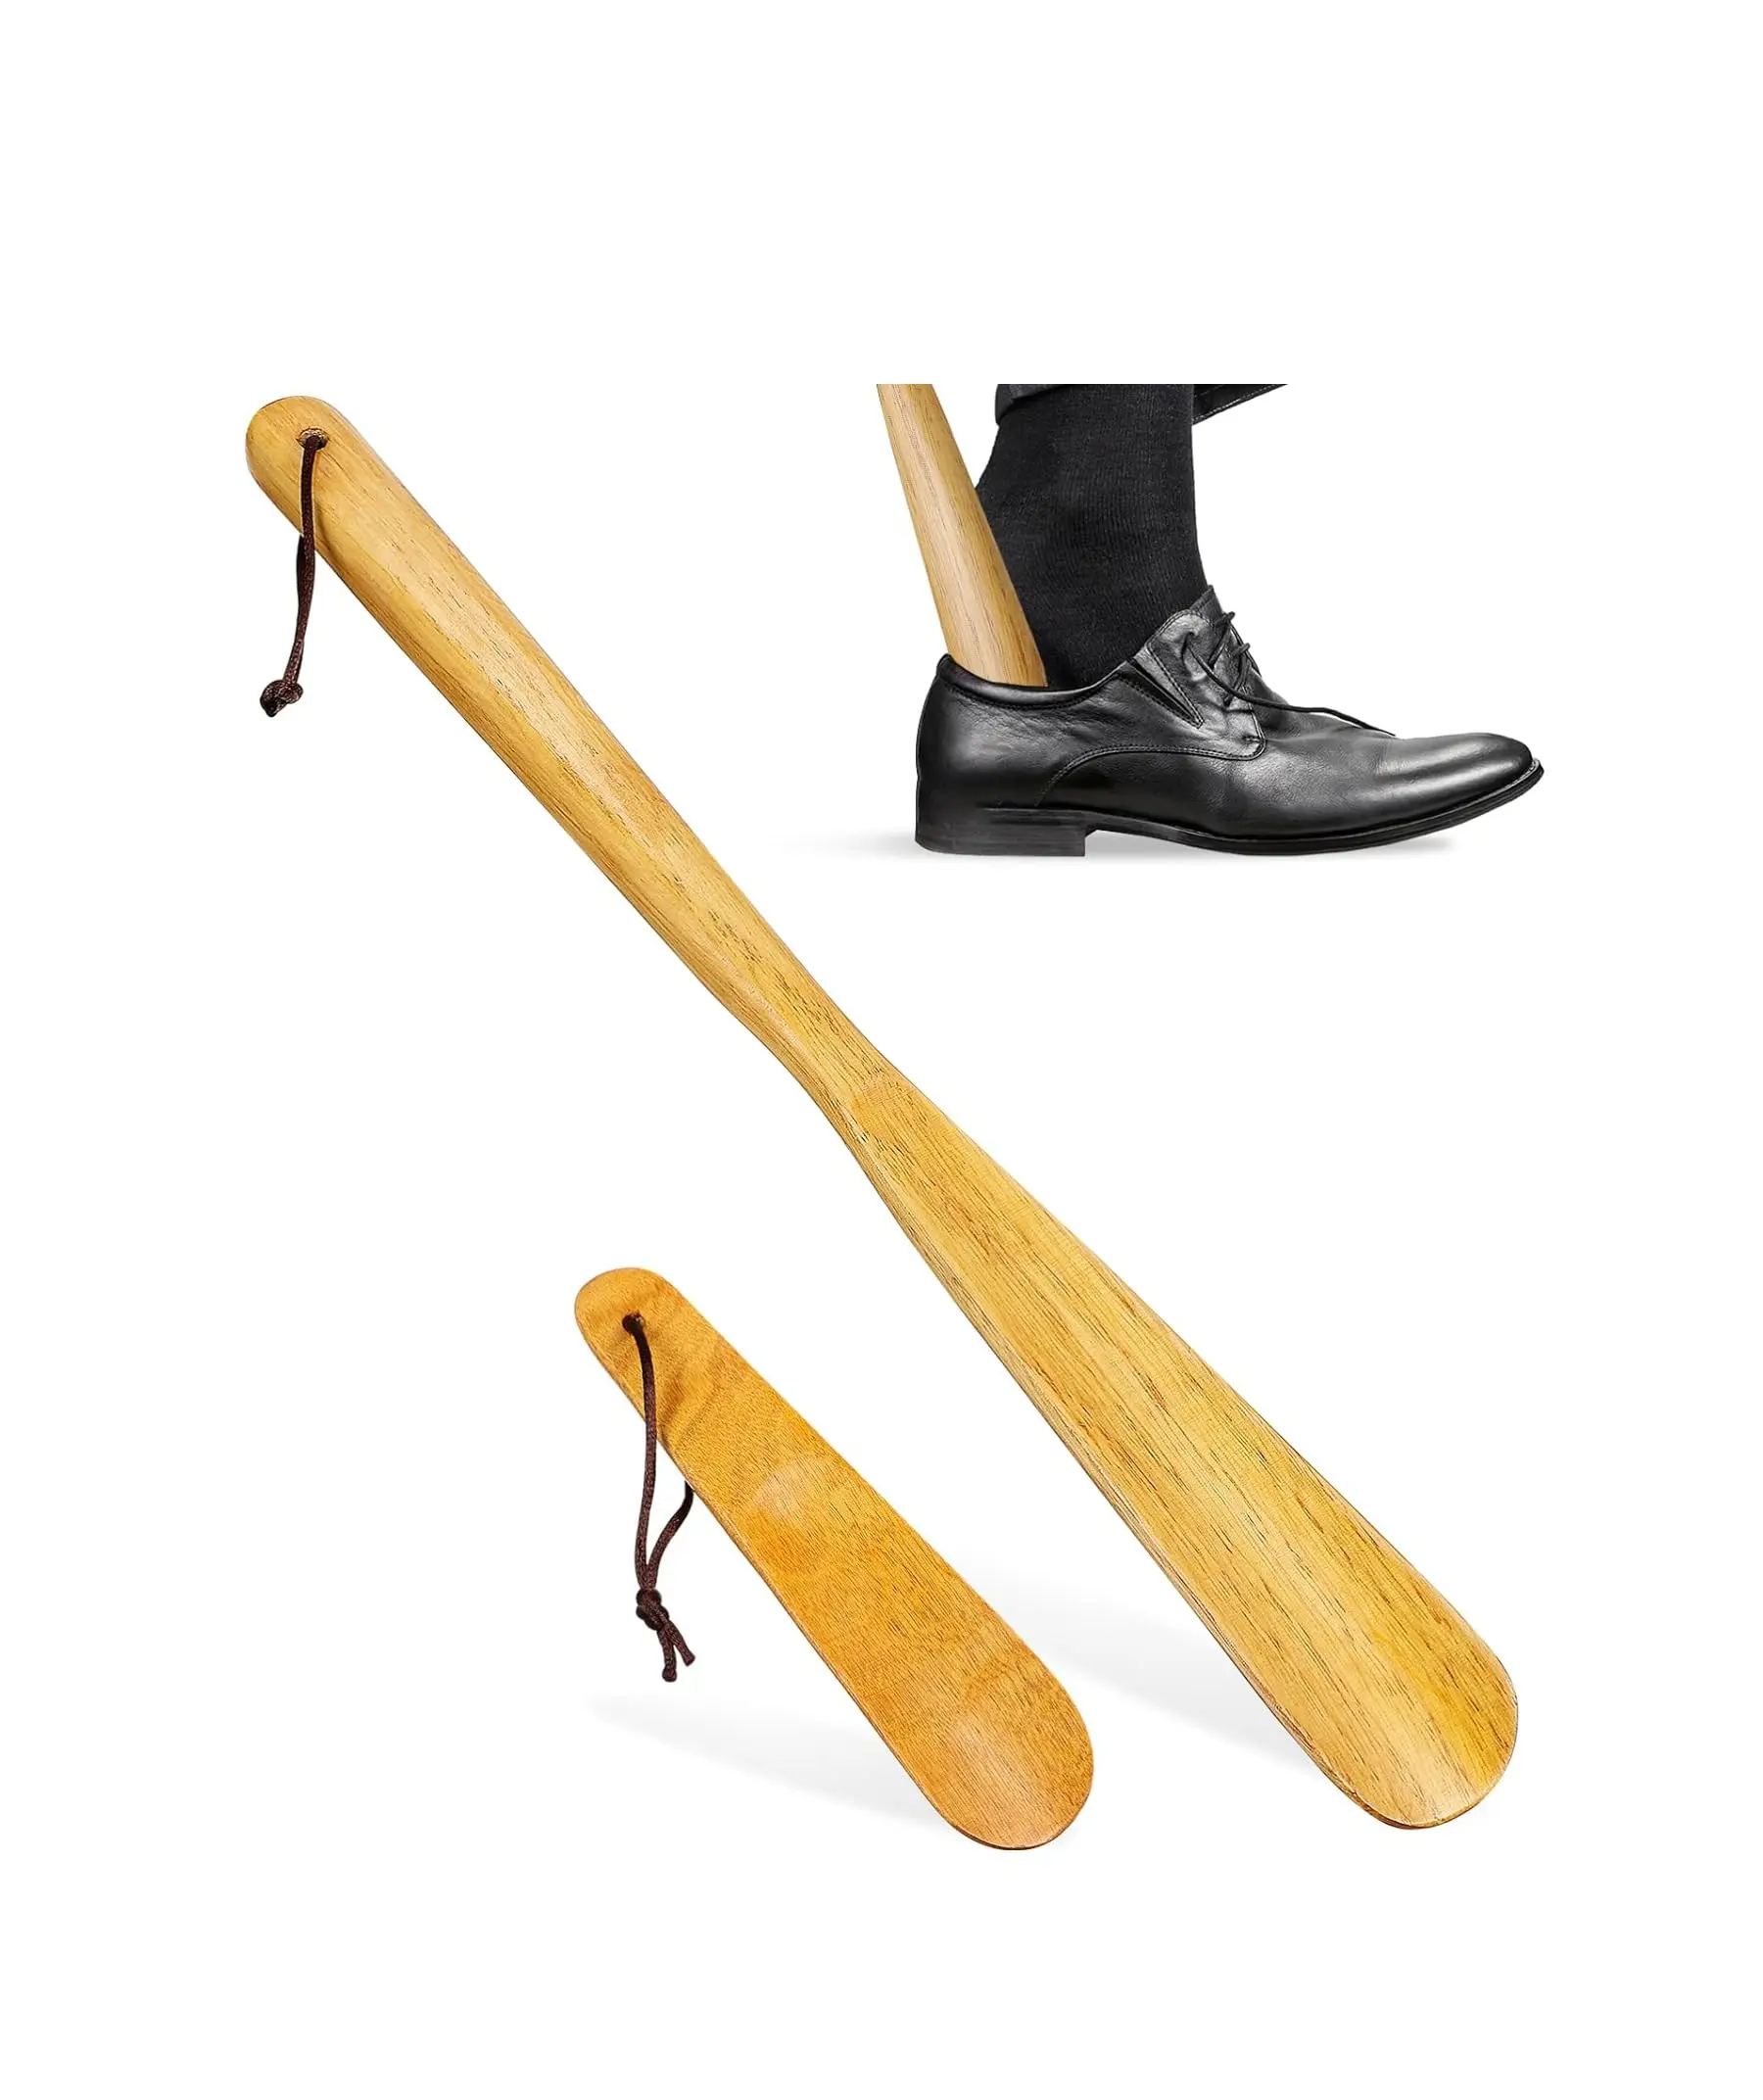 Wooden Shoe Horn 2 Pcs - 15.5in & 6.2in Shoe Spoon for Boots and Shoes Horn Long and Short Handle for Seniors